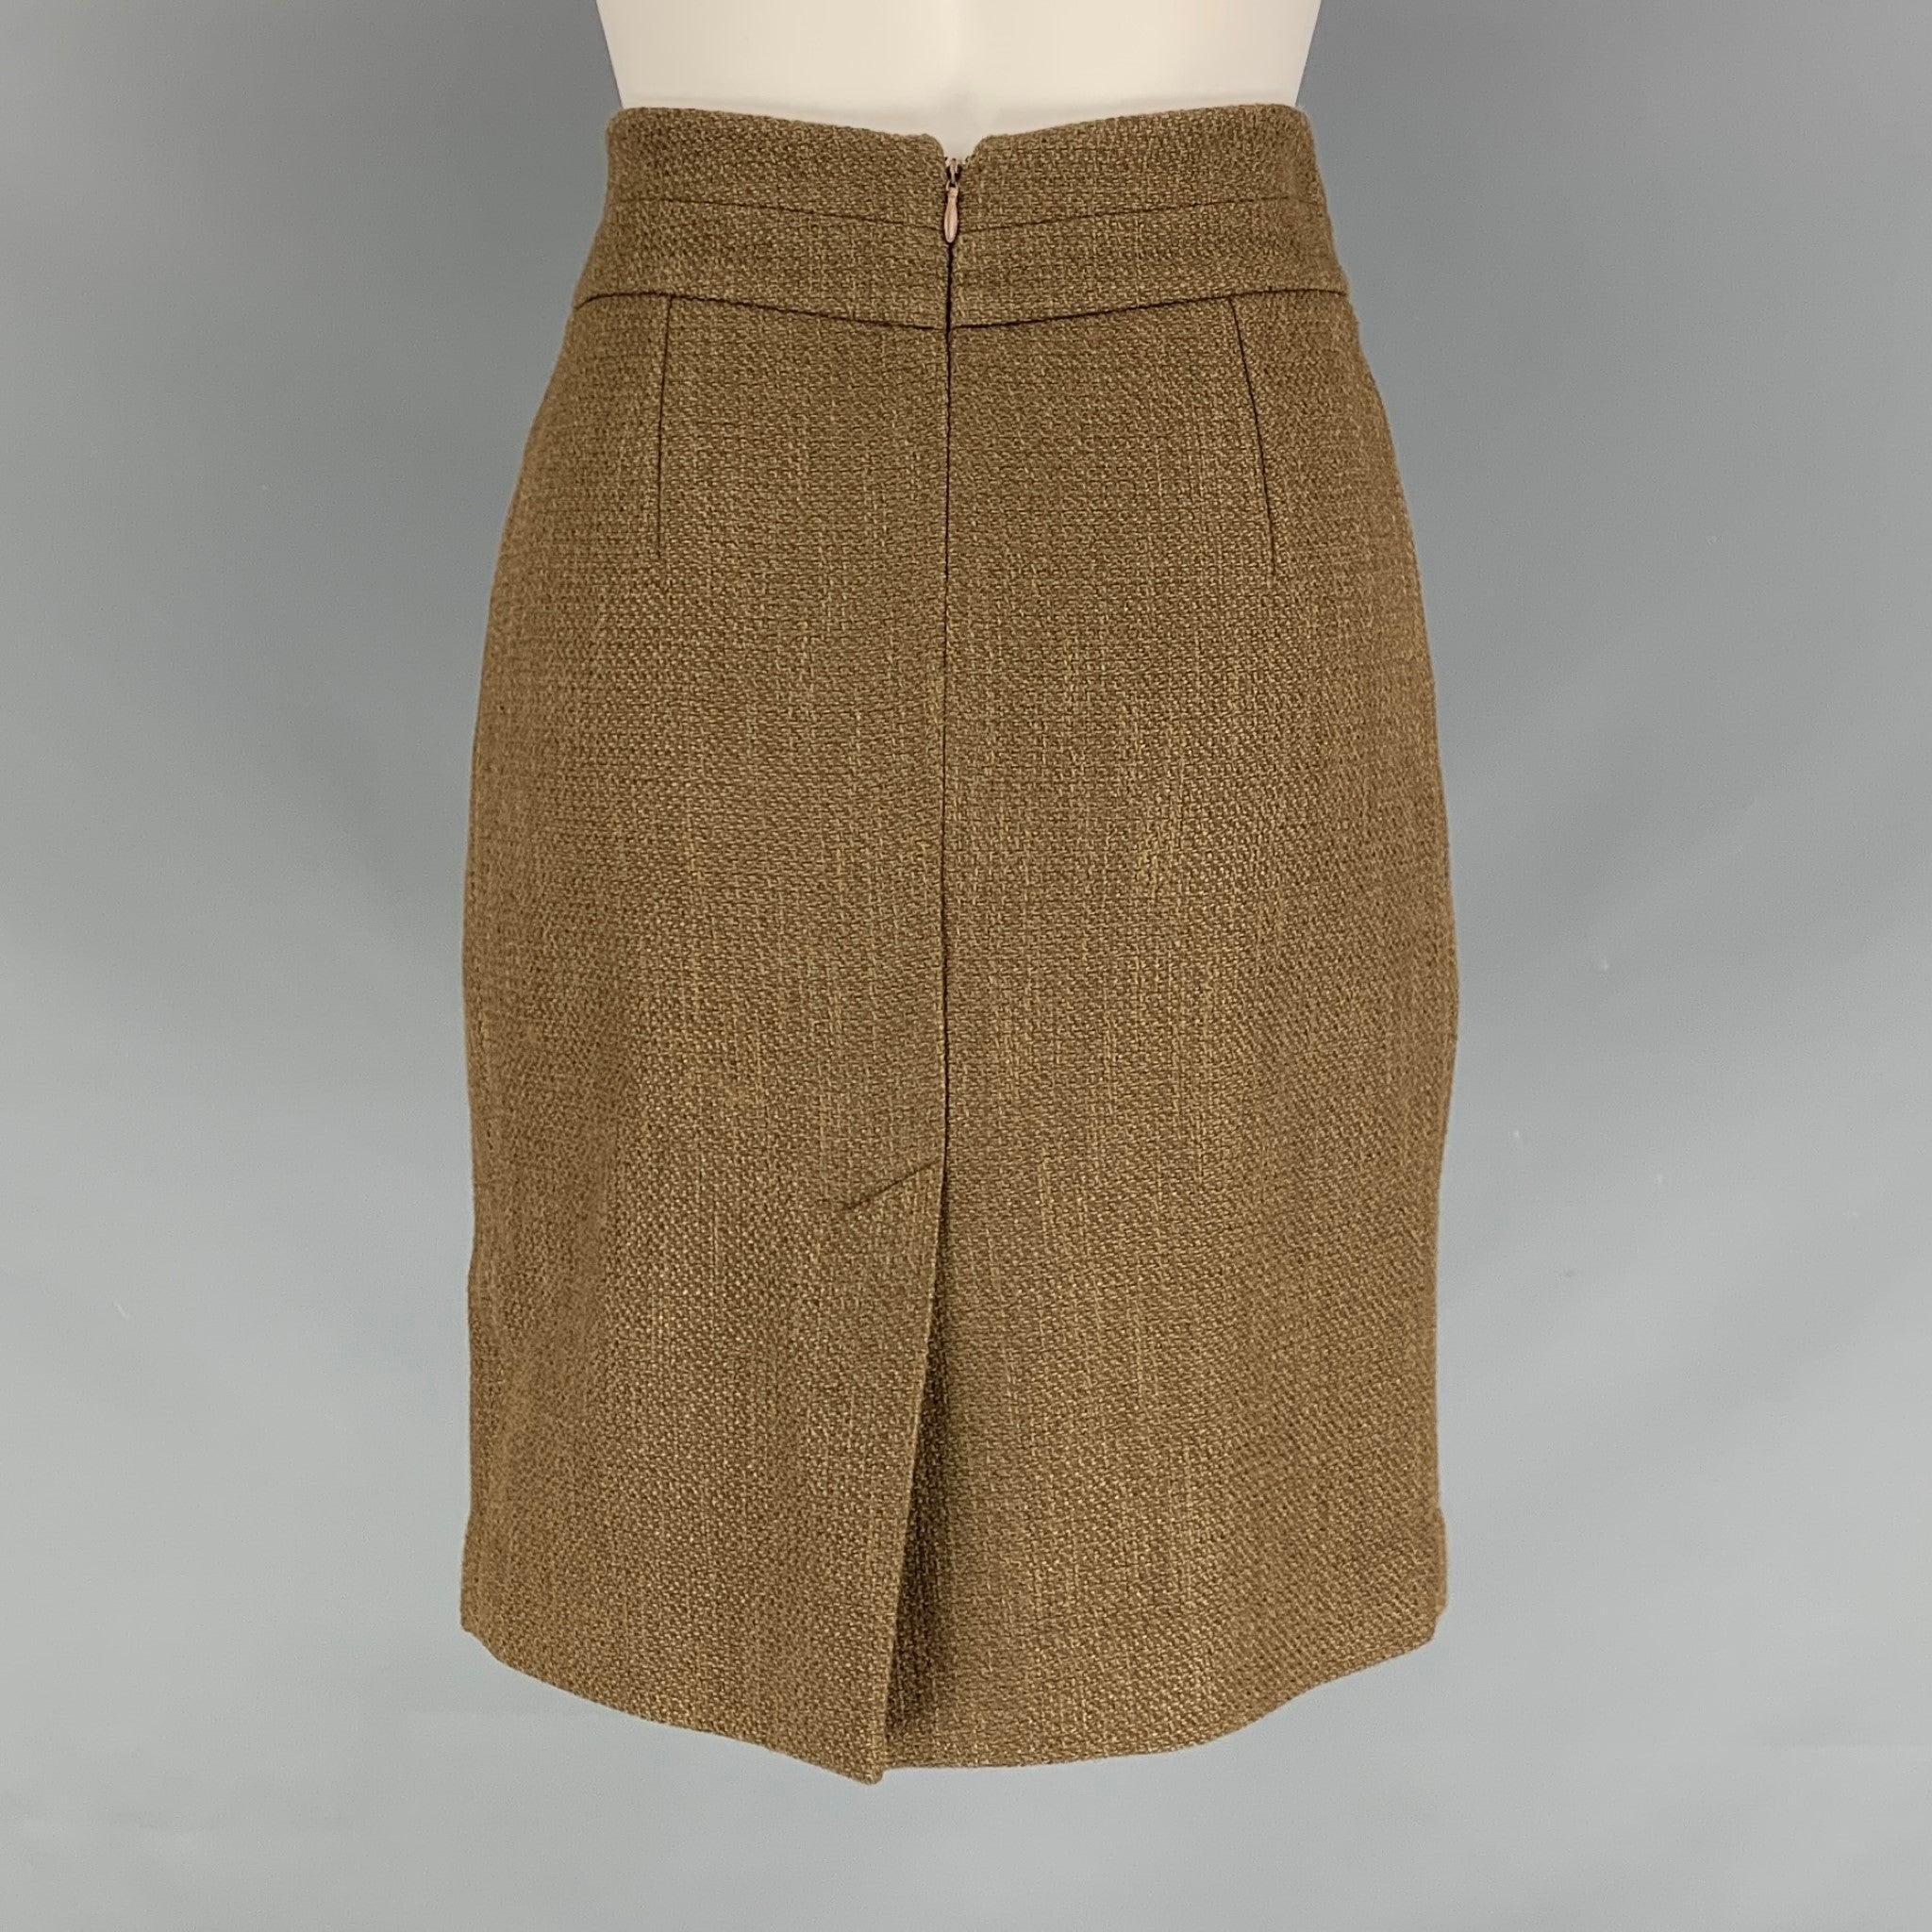 ETRO Size 2 Olive Wool Blend Pleated Skirt In Excellent Condition For Sale In San Francisco, CA